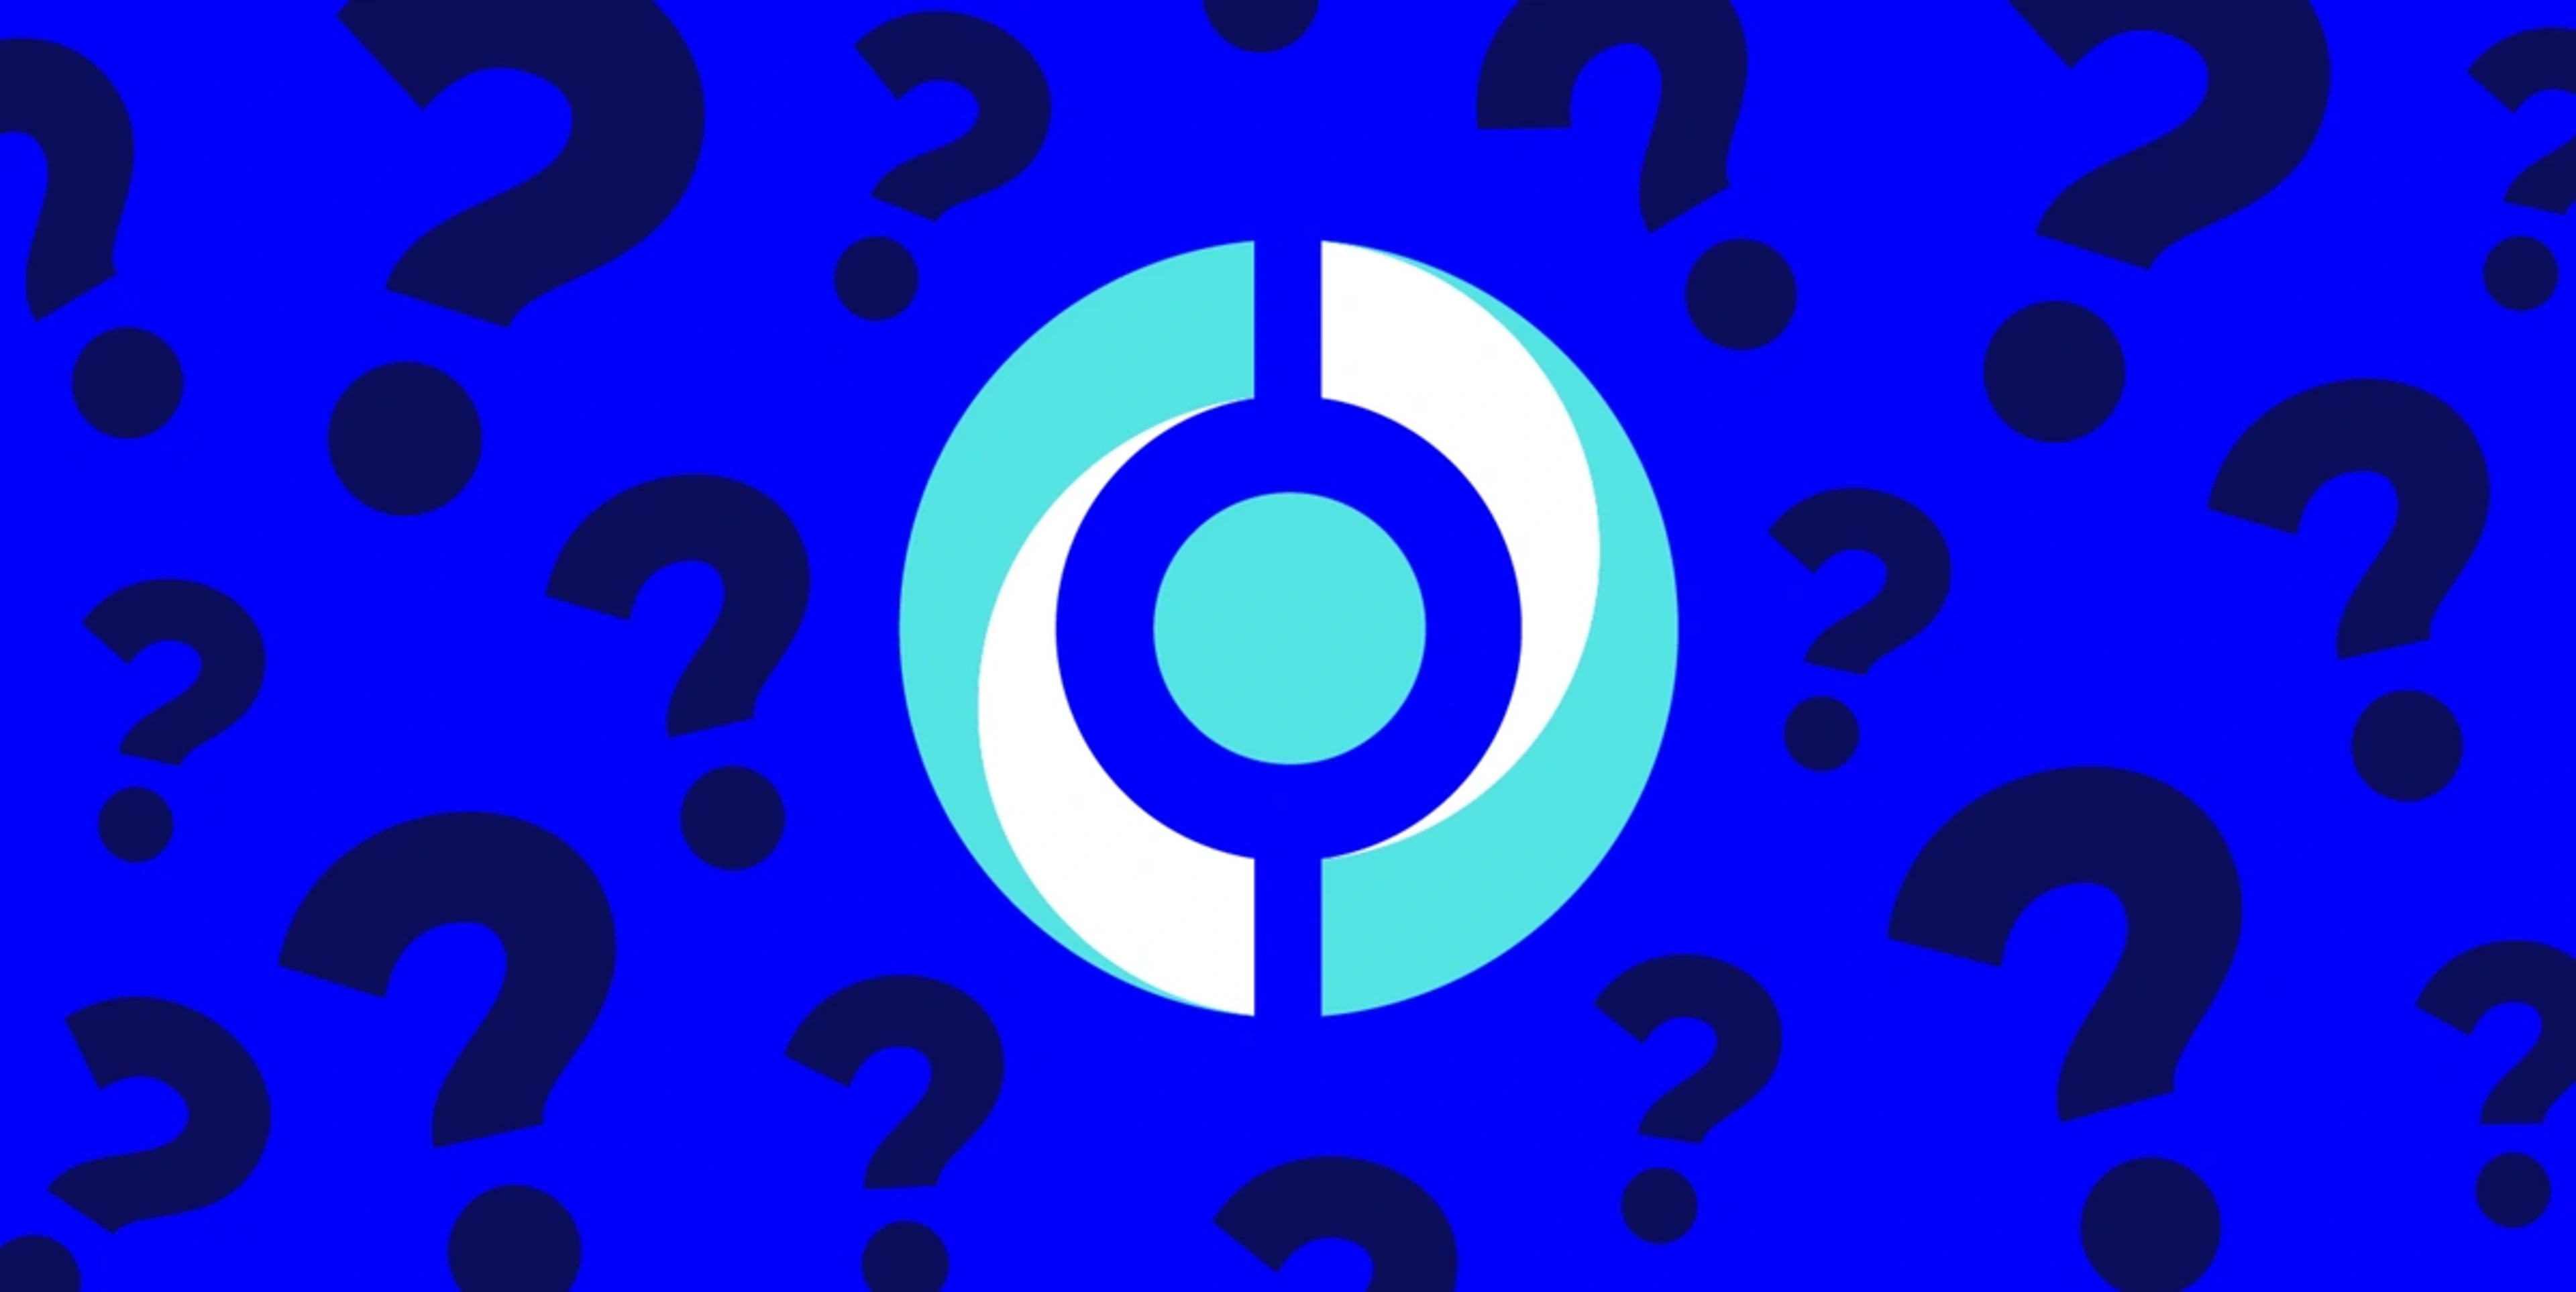 blue background with black question marks with careercircle logo in the middle